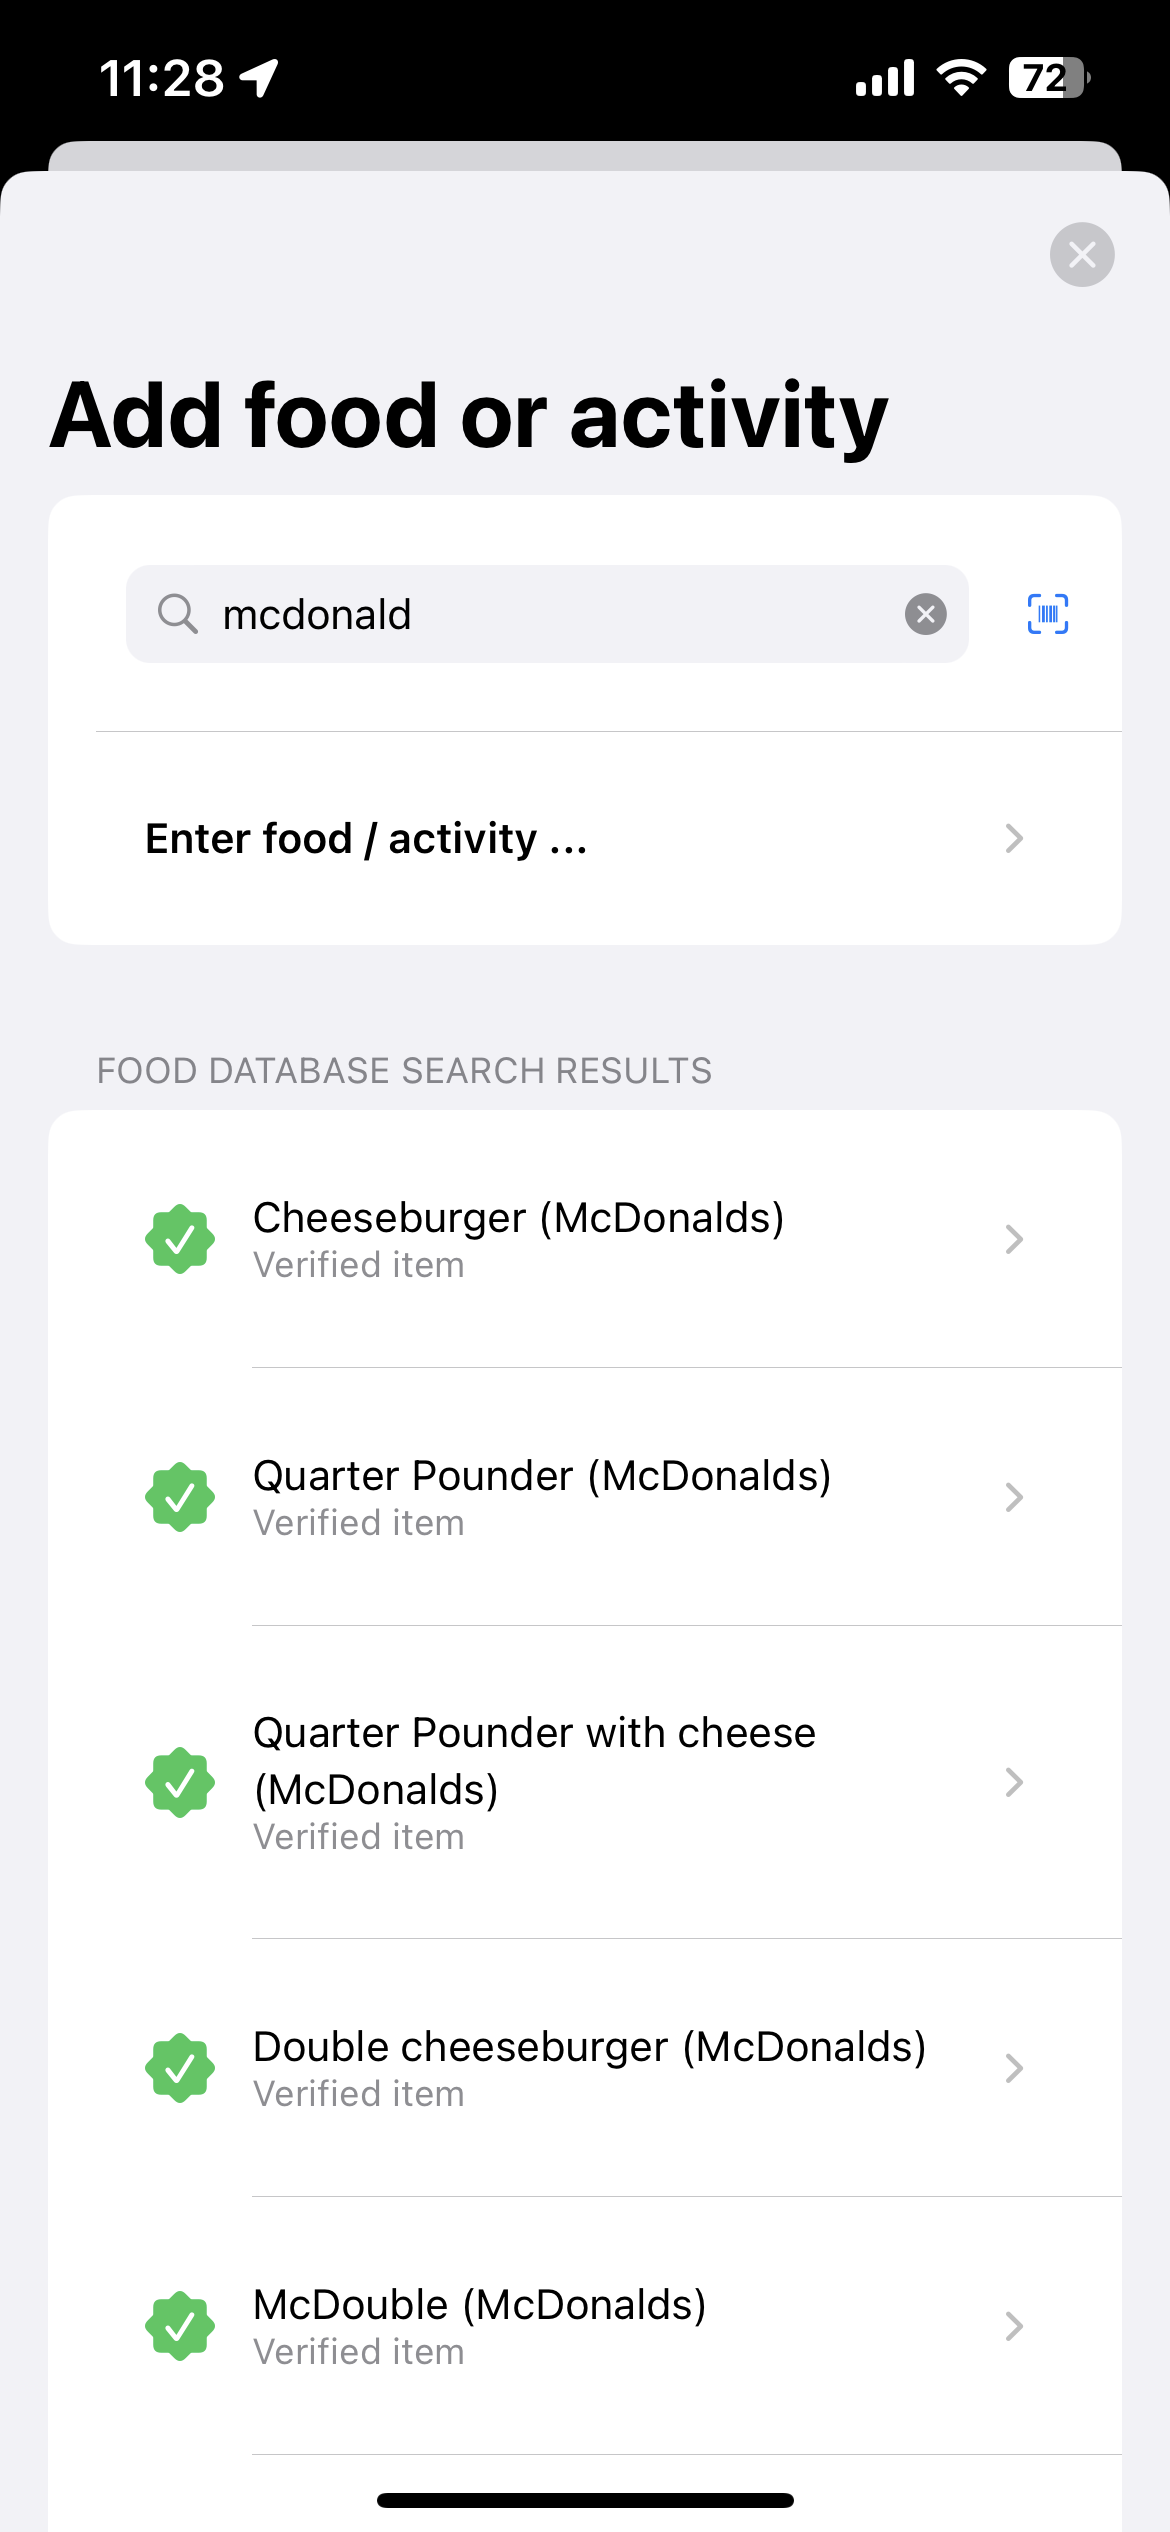 Searching the food database